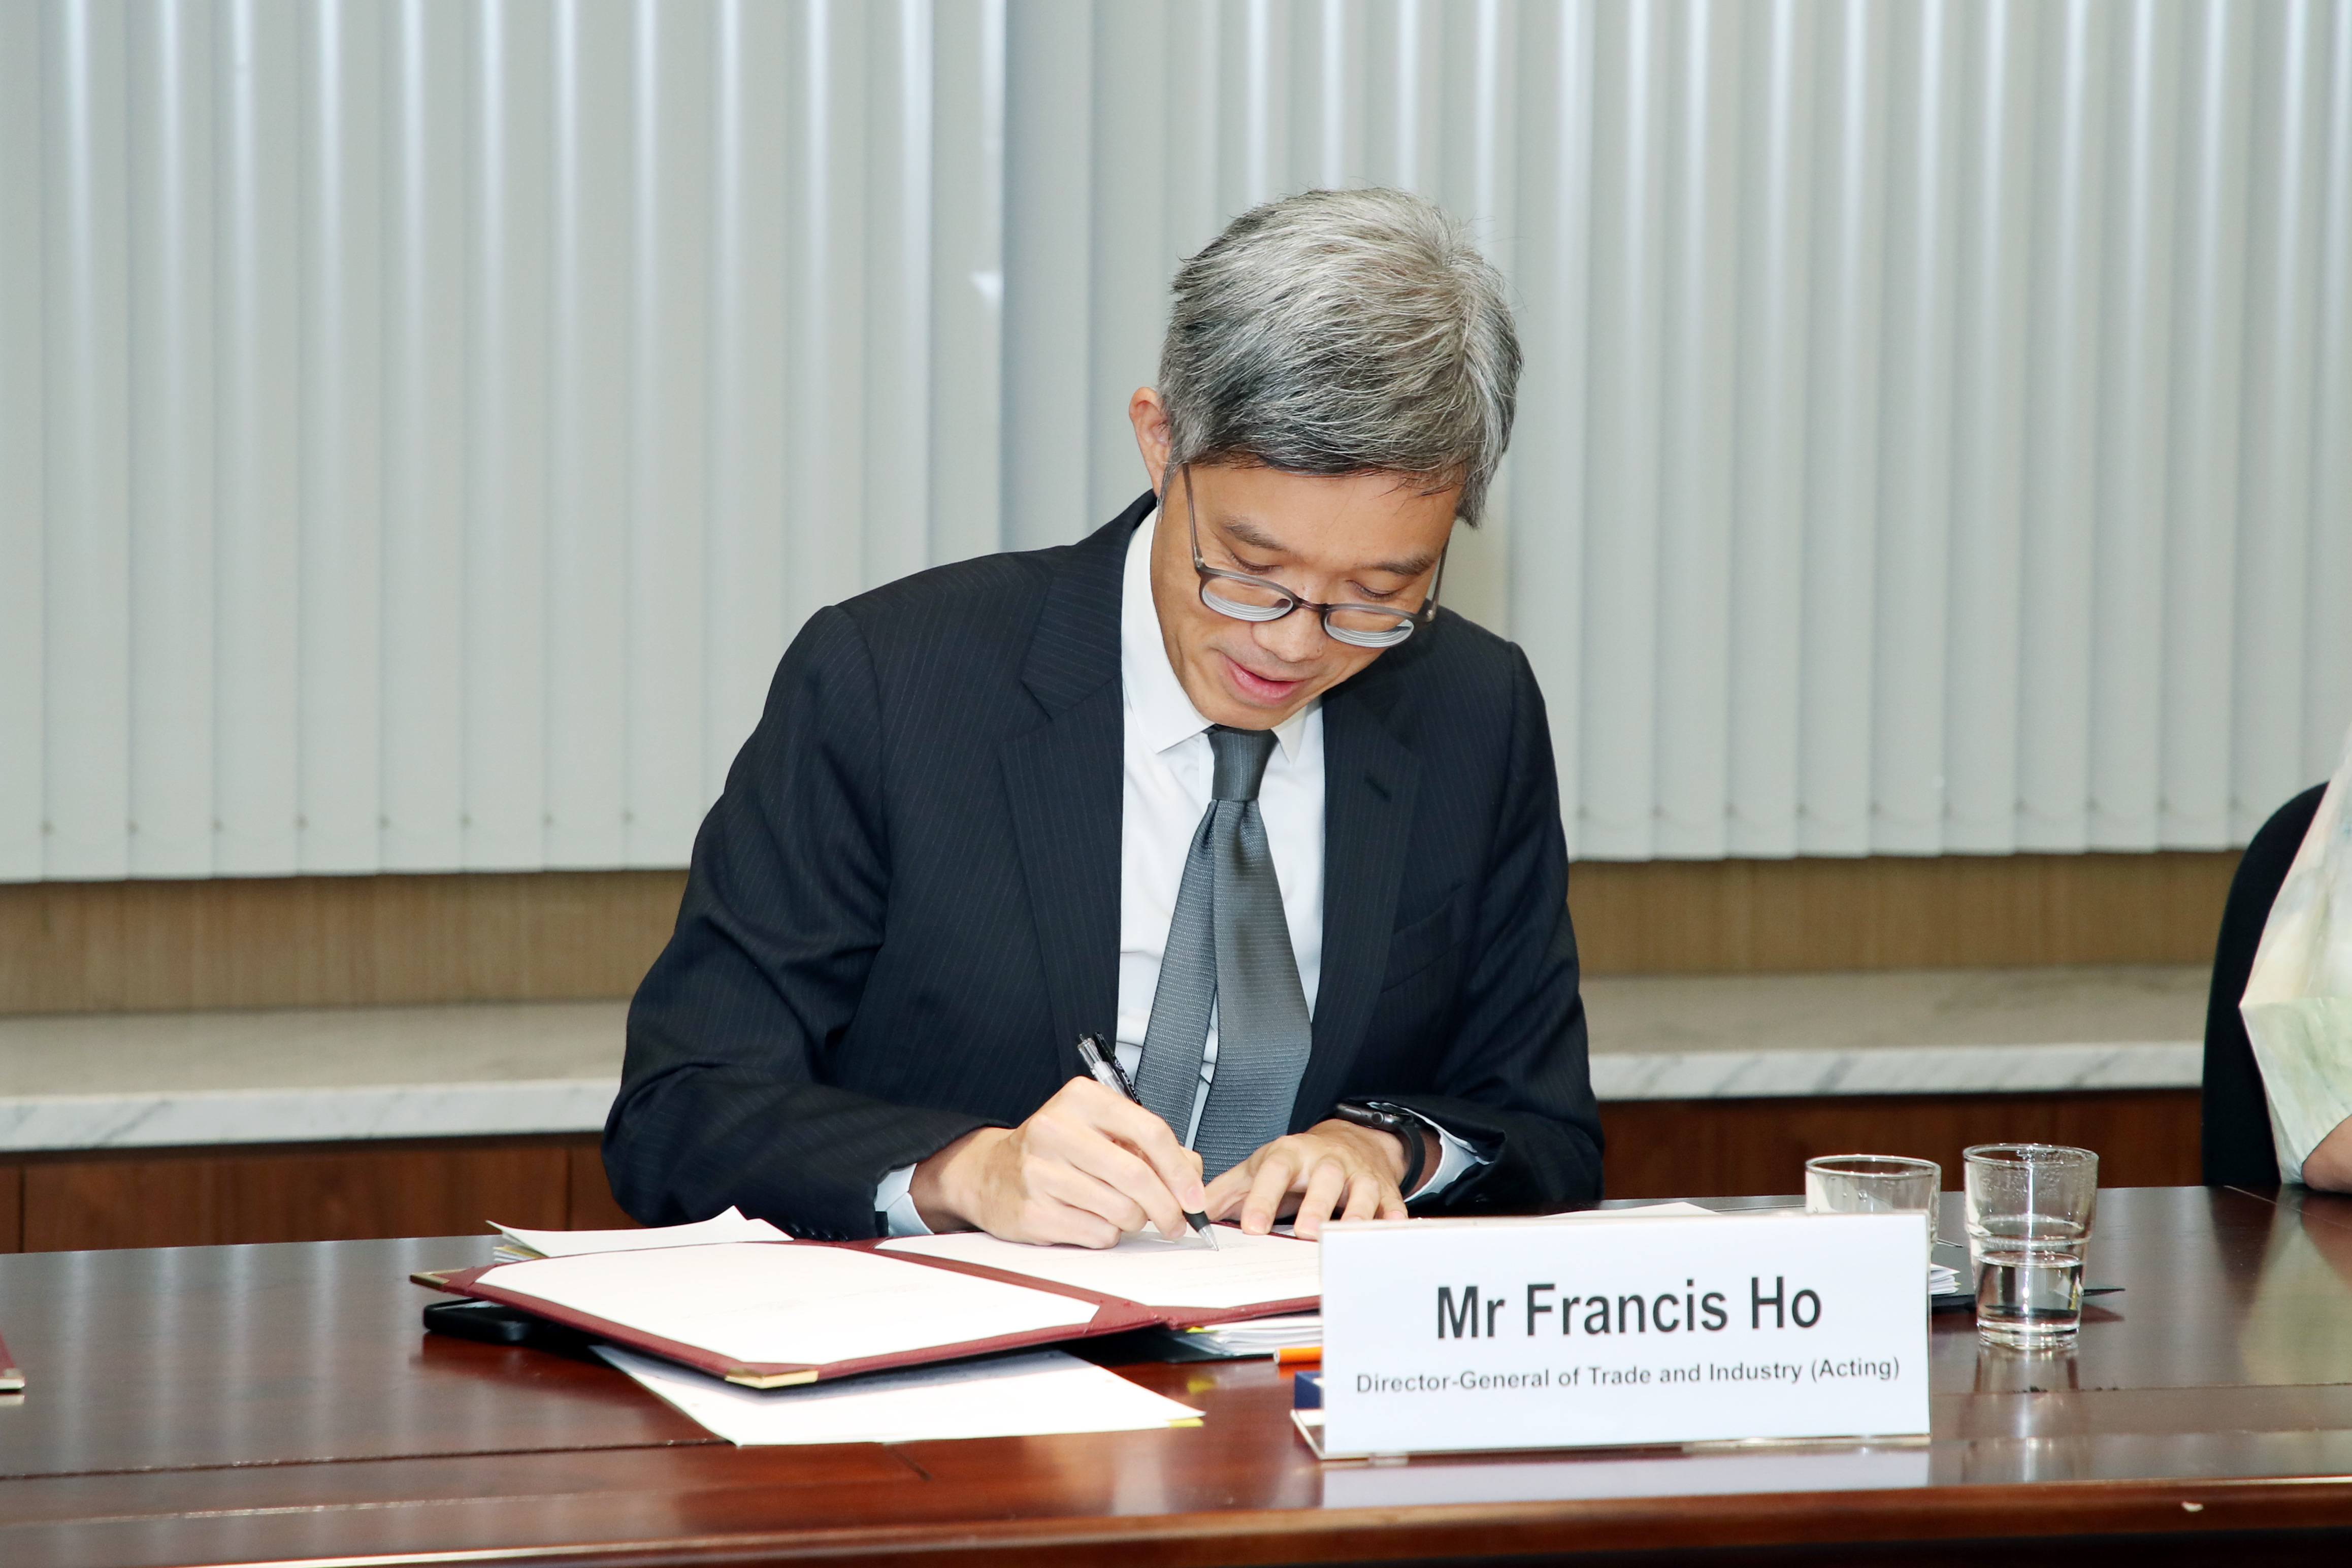 Hong Kong and New Zealand signed three implementing arrangements at the video-conference meeting of the Joint Commission under the Closer Economic Partnership Agreement today (May 5) to facilitate the ongoing co-operation and communication in the areas of rules of origin, sanitary and phytosanitary measures, and government procurement. Picture shows the Acting Director-General of Trade and Industry, Mr Francis Ho, signing the implementing arrangements.